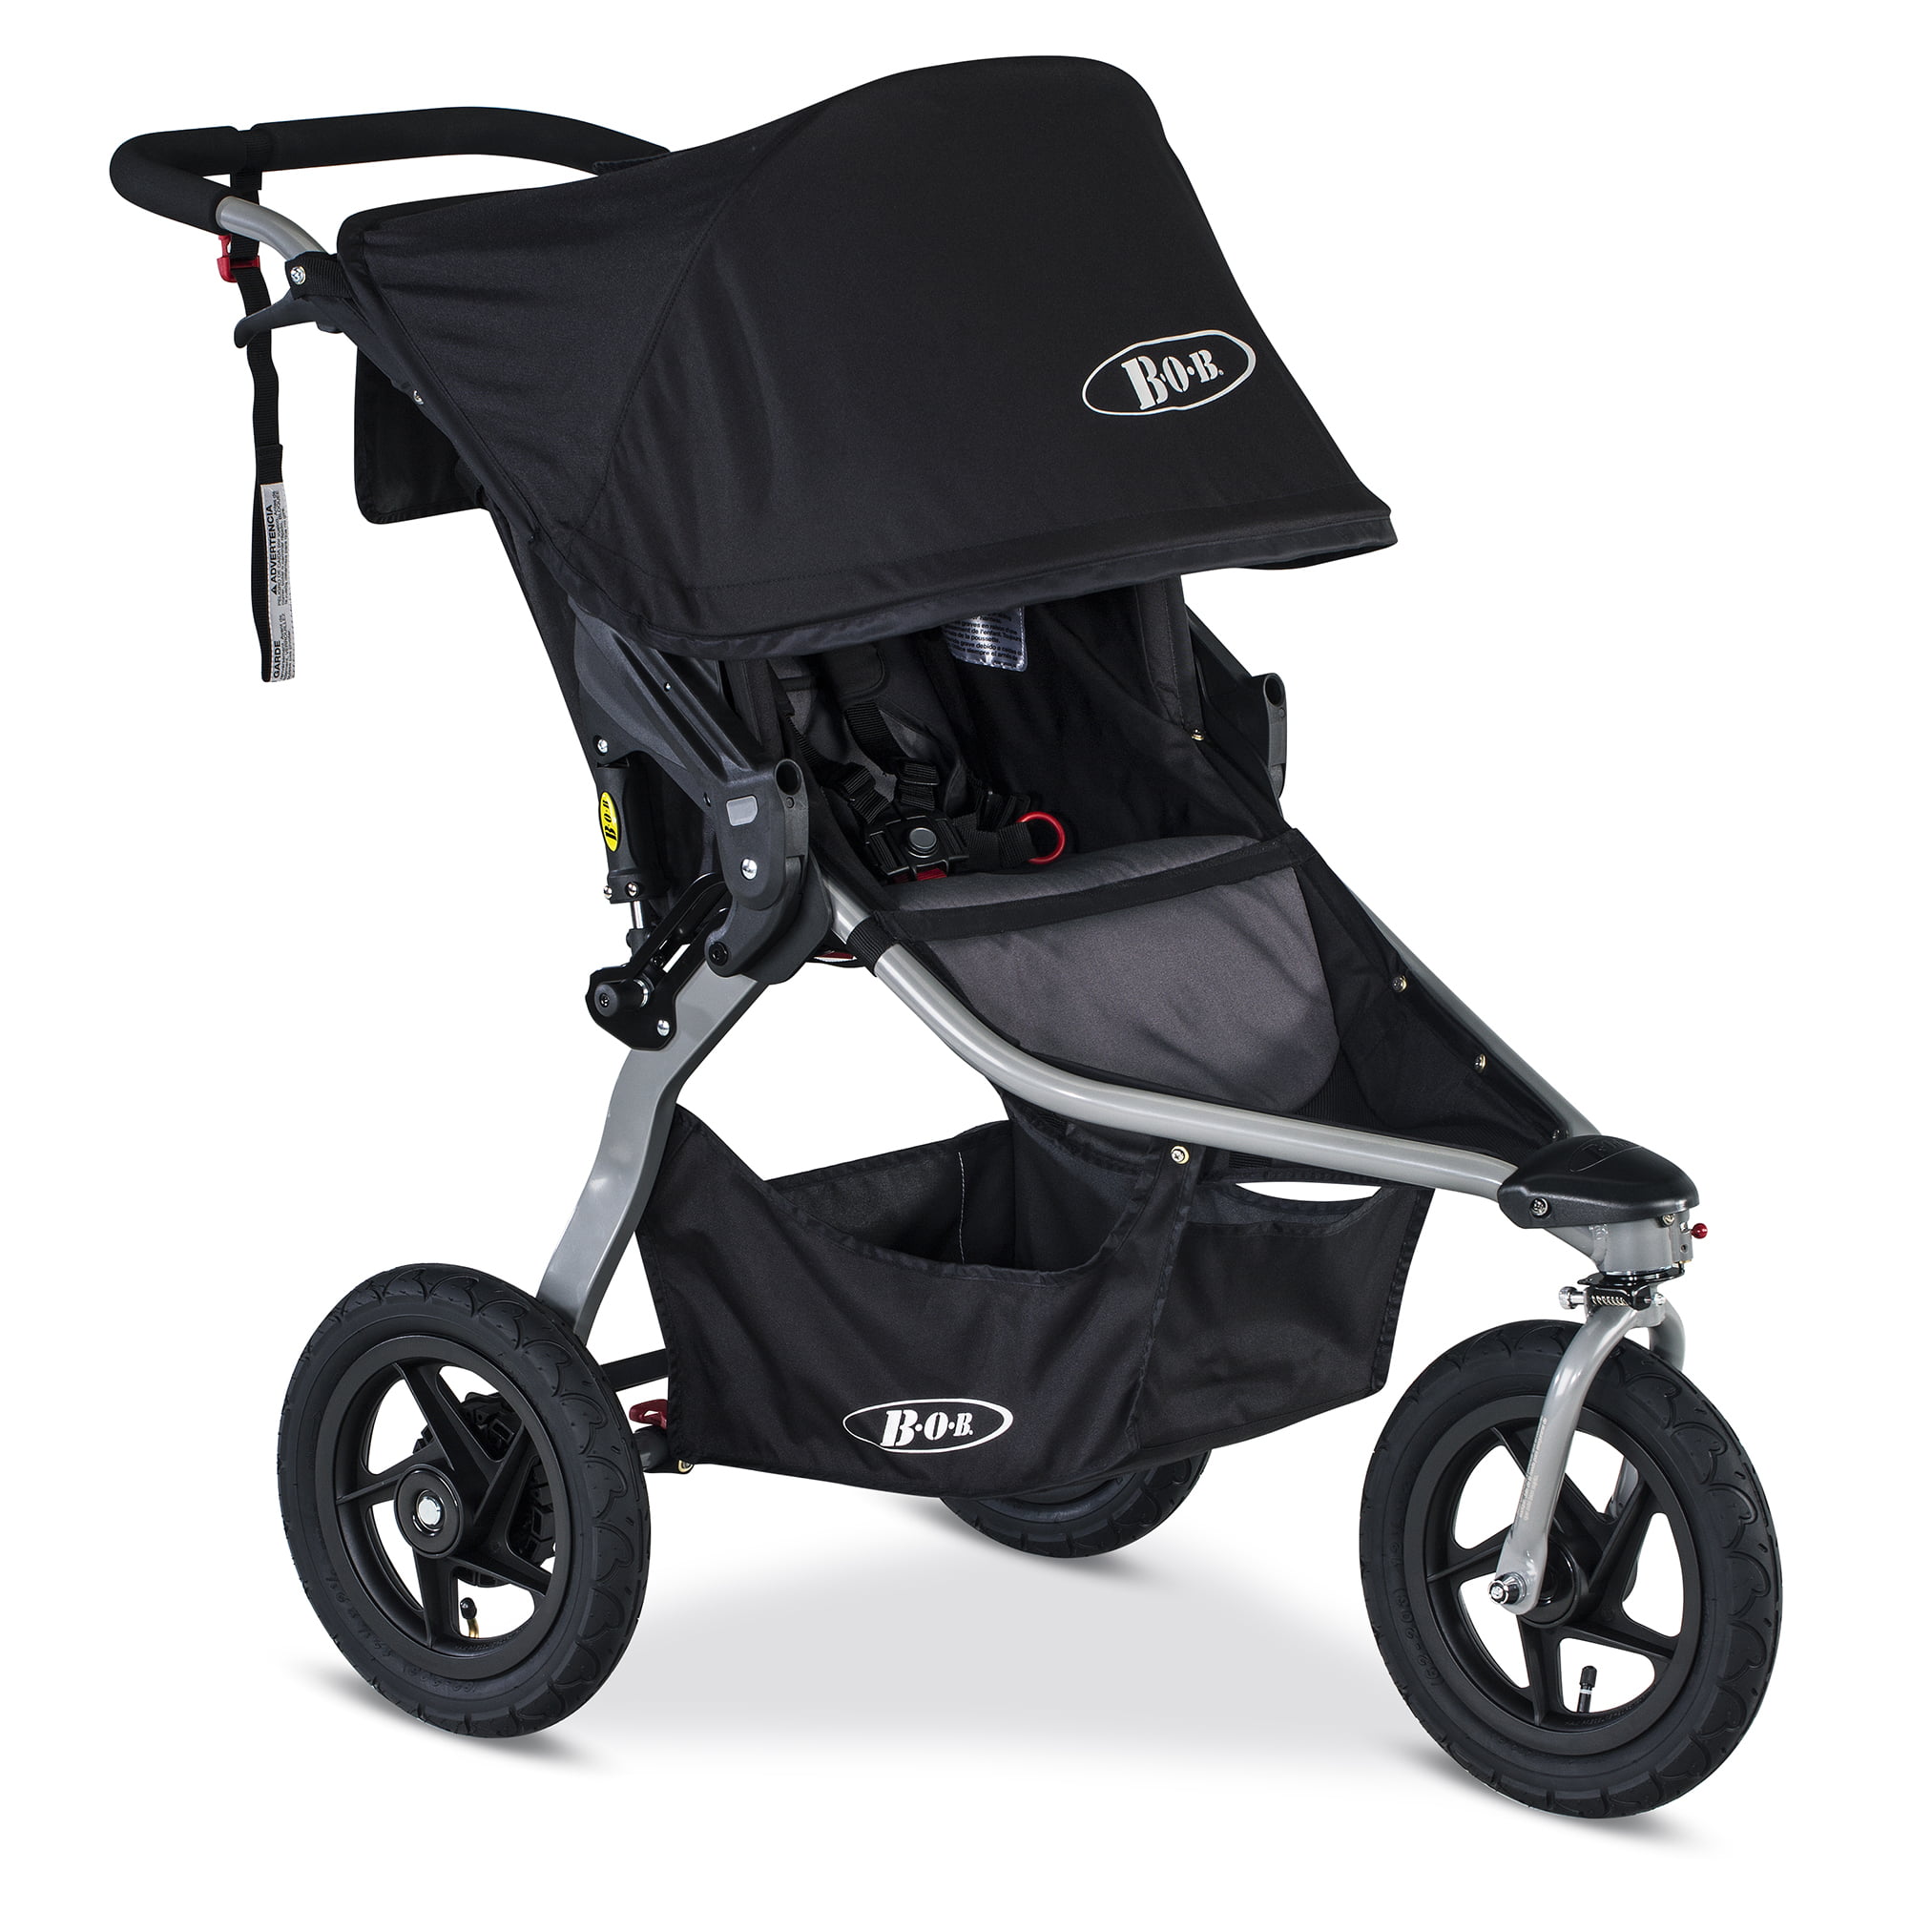 best travel stroller for baby and toddler